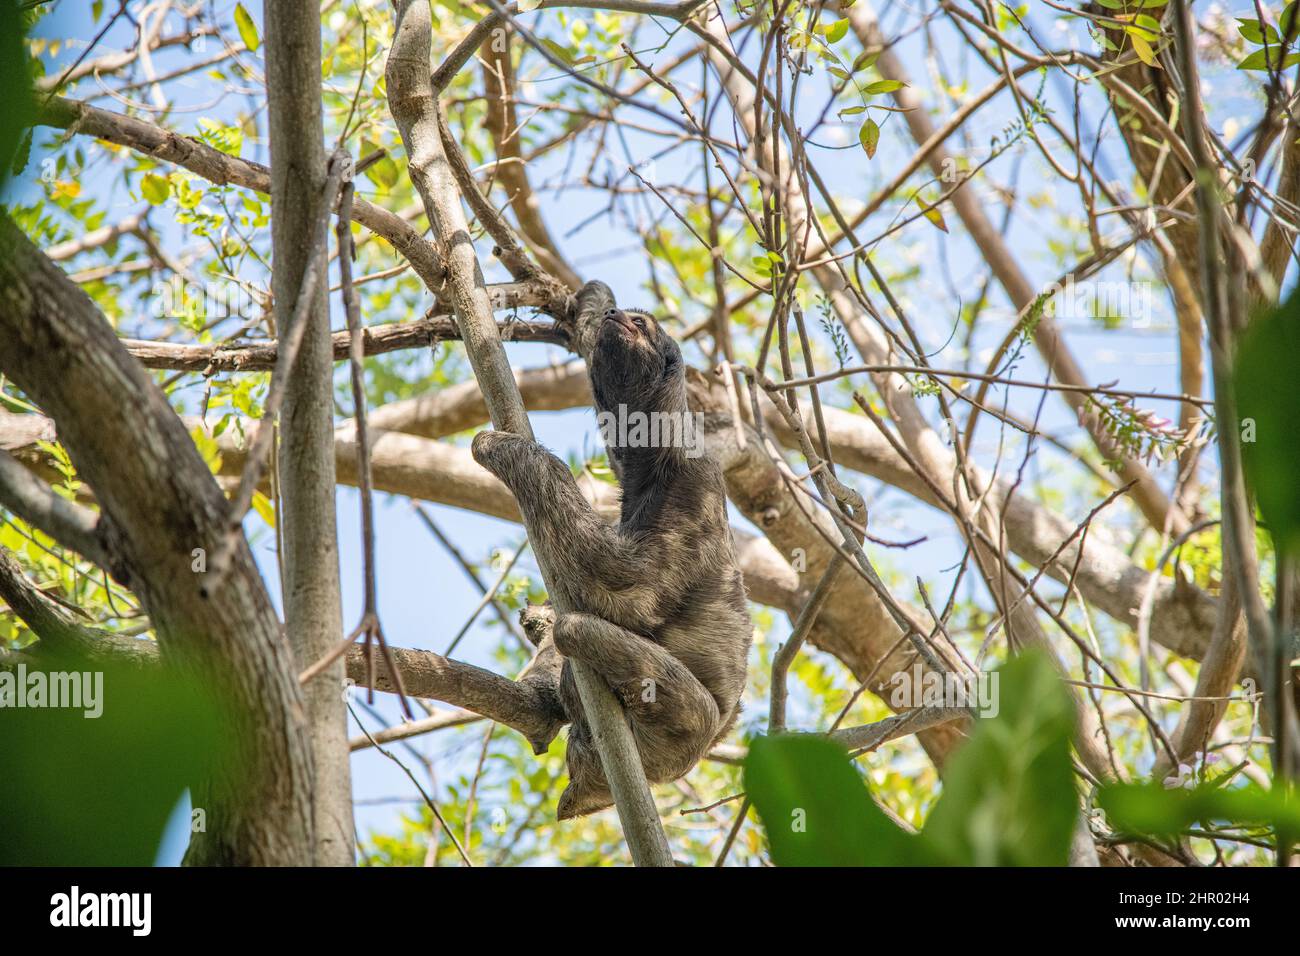 A sloth hanging from a tree in Centenario Park in Cartagena, Colombia Stock Photo